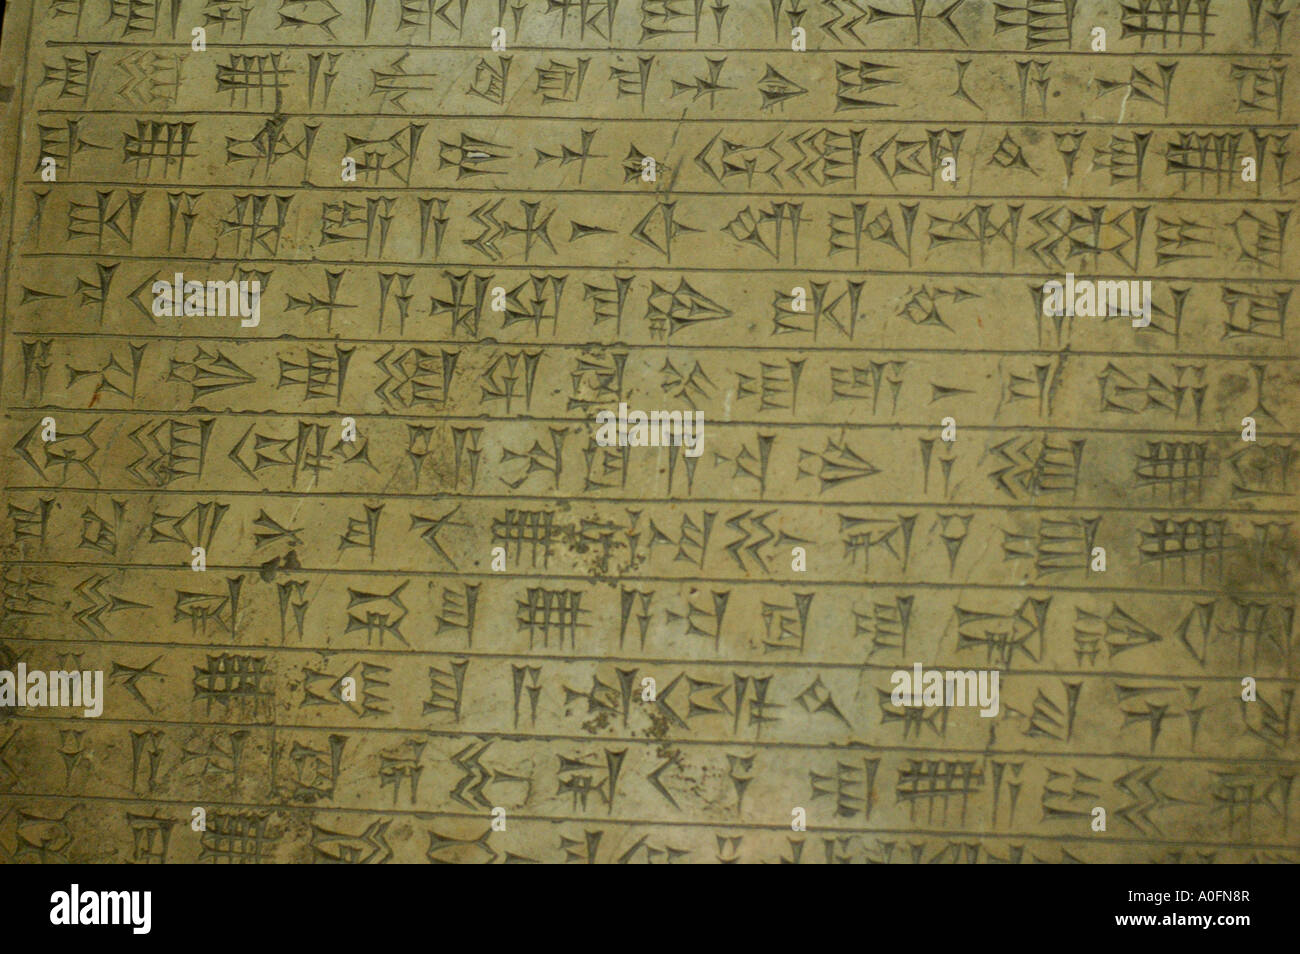 Ancient Persian script written on a piece on display in Tehran national museum, Iran. Stock Photo